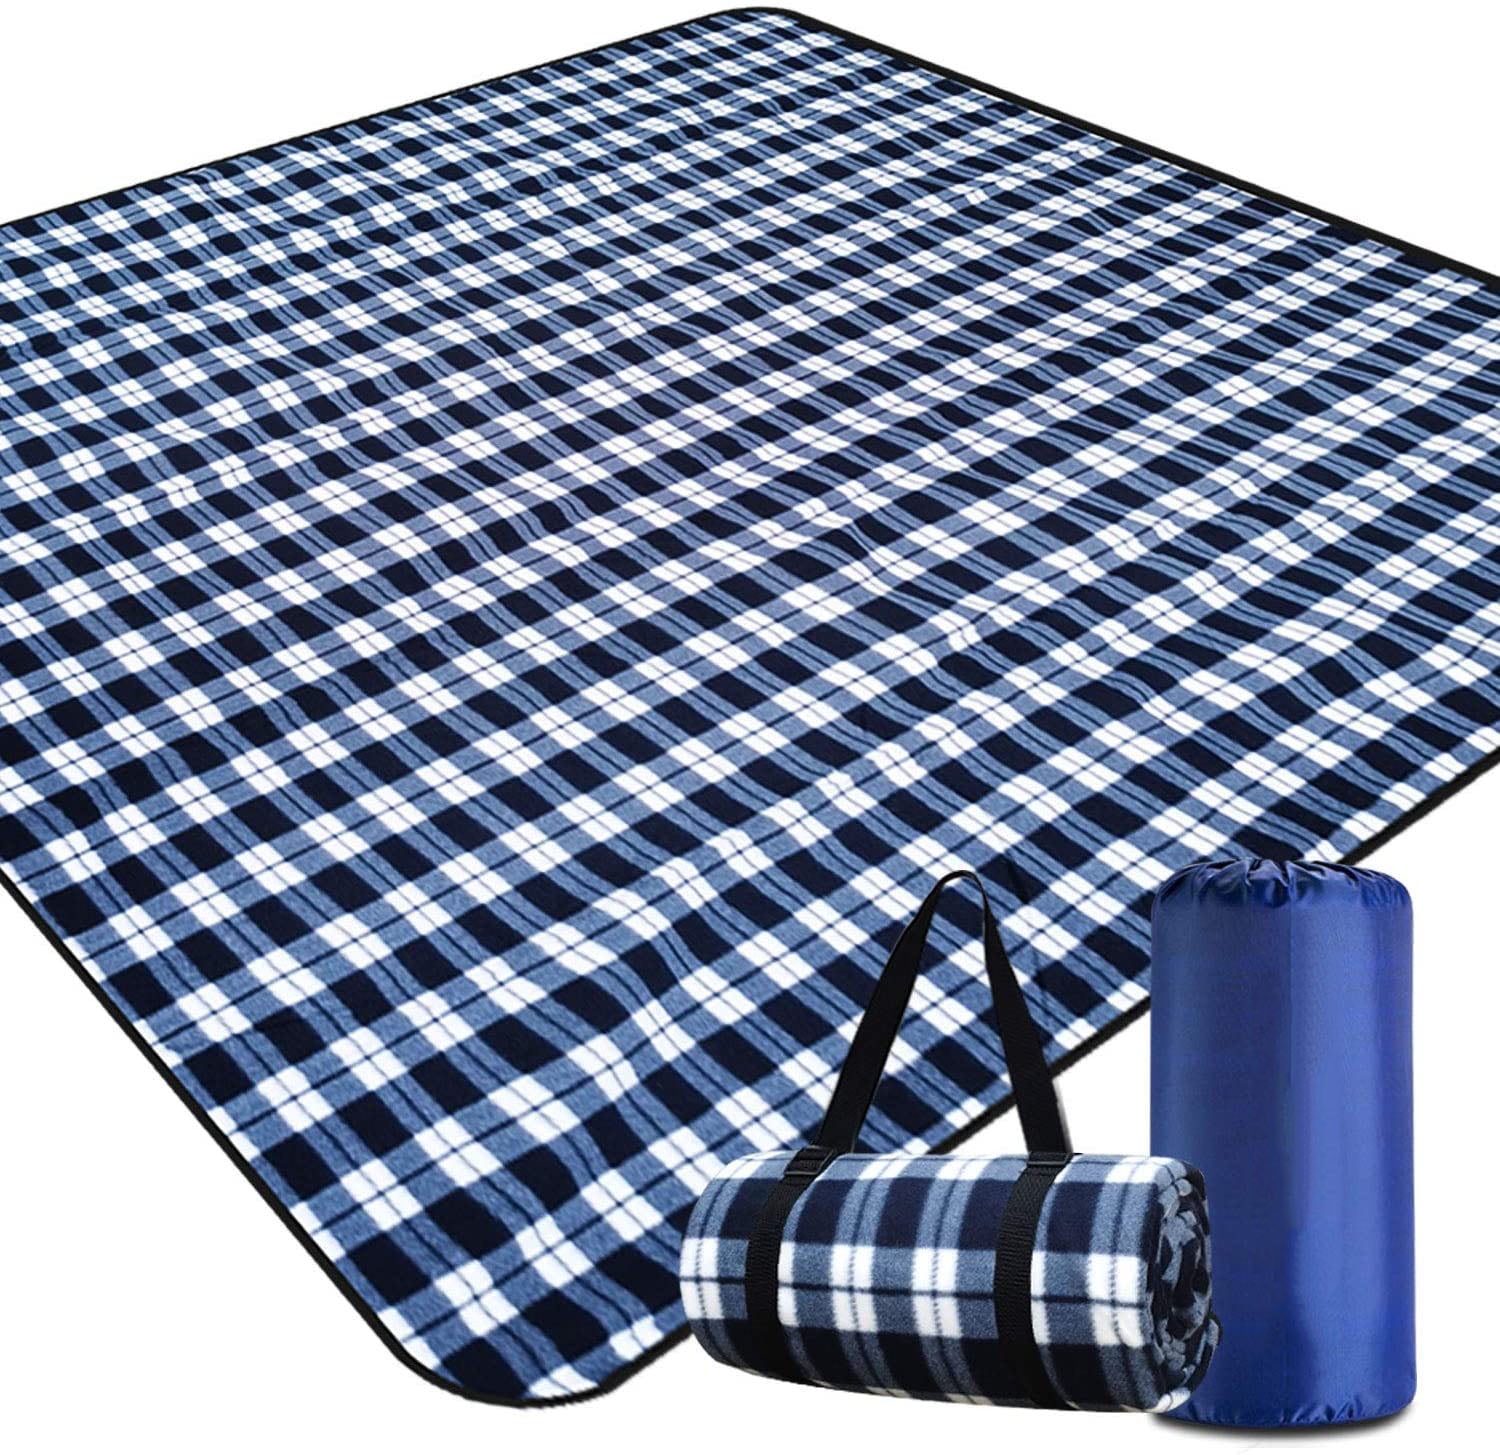 Large Checkered Picnic Blanket 3 Layers Waterproof Beach Mat Outdoor Playing Mat 